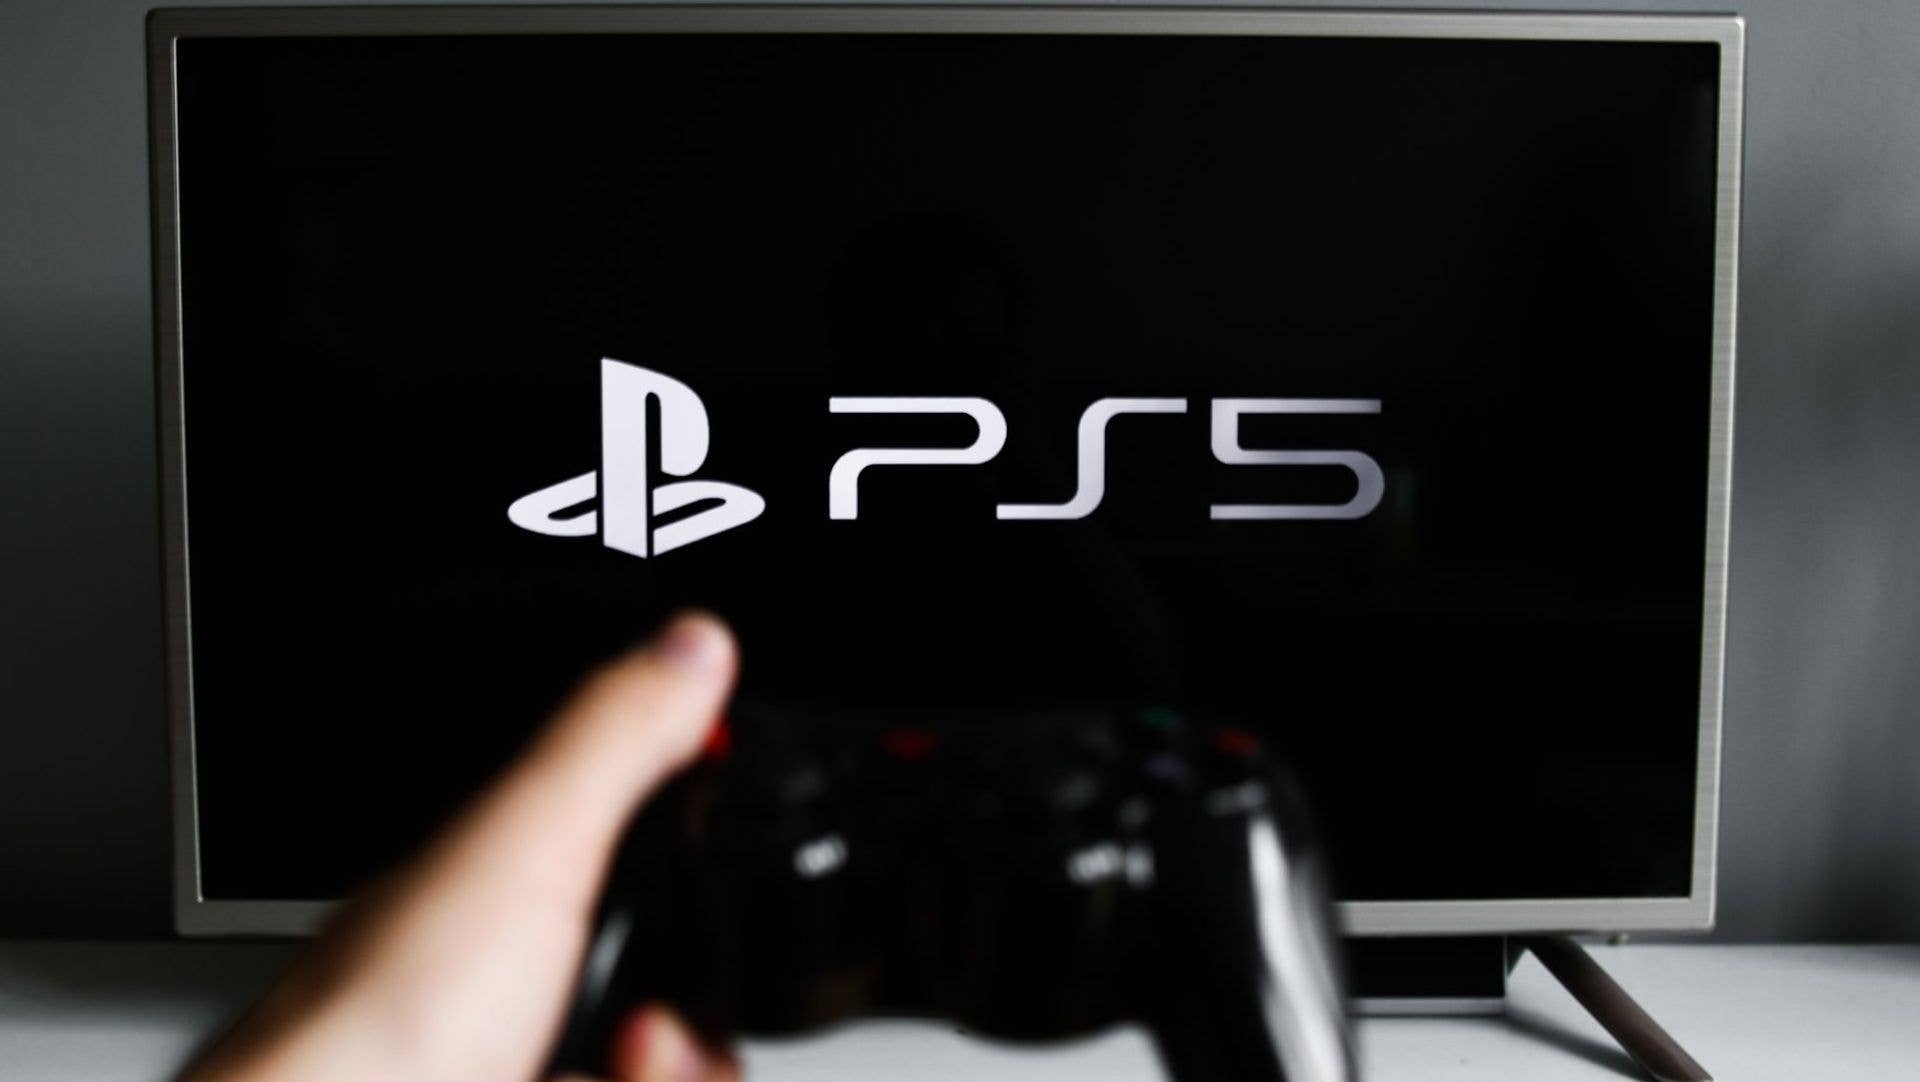 PlayStation Free-to-Play Games Will Reportedly Have Ads by Late 2022